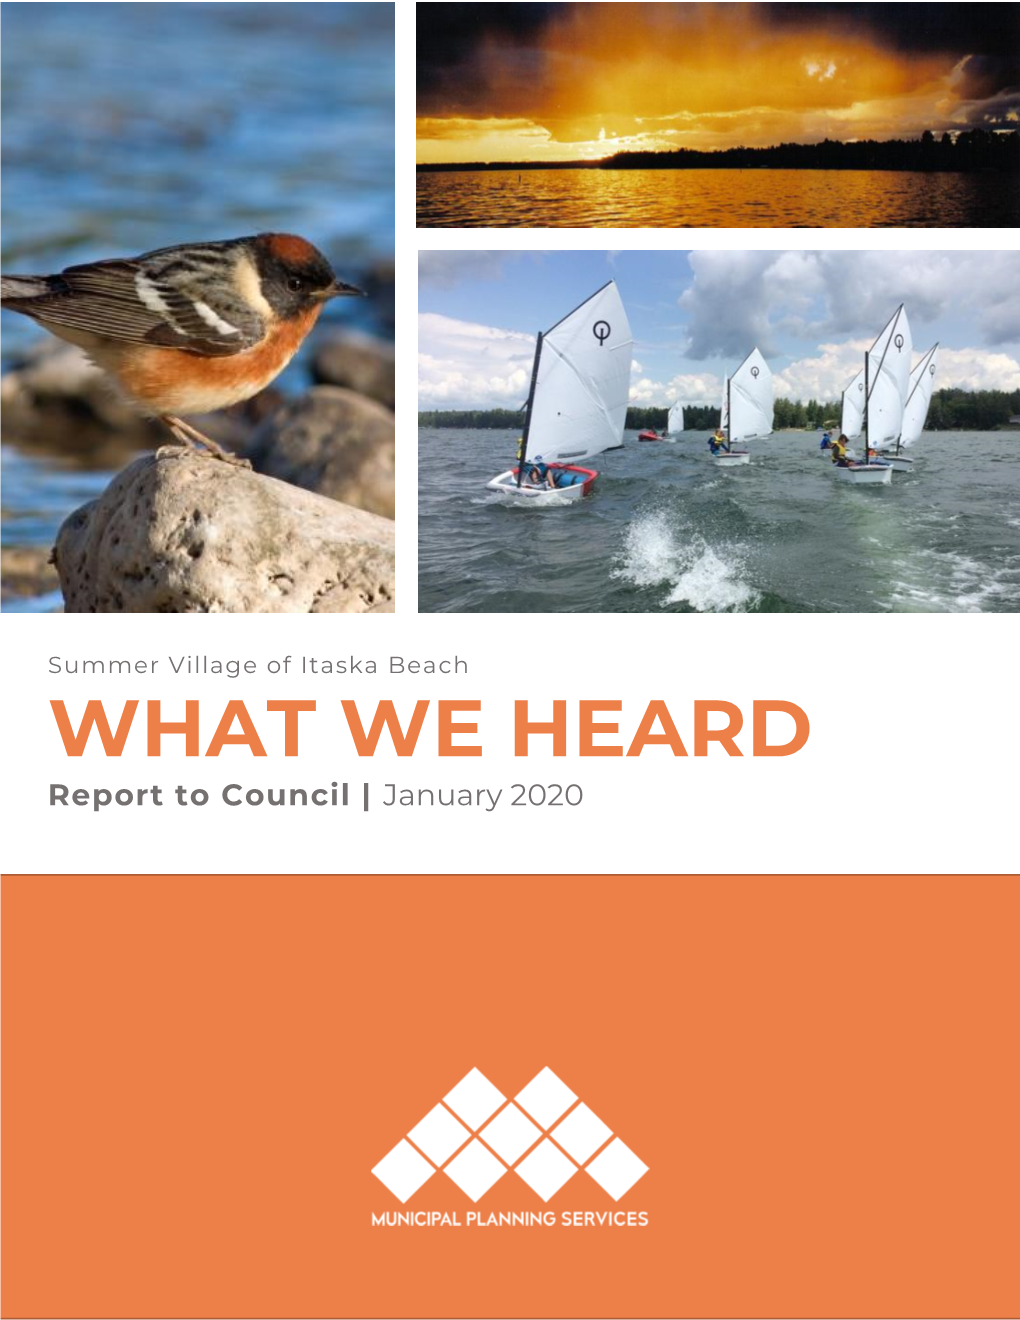 WHAT WE HEARD Report to Council | January 2020